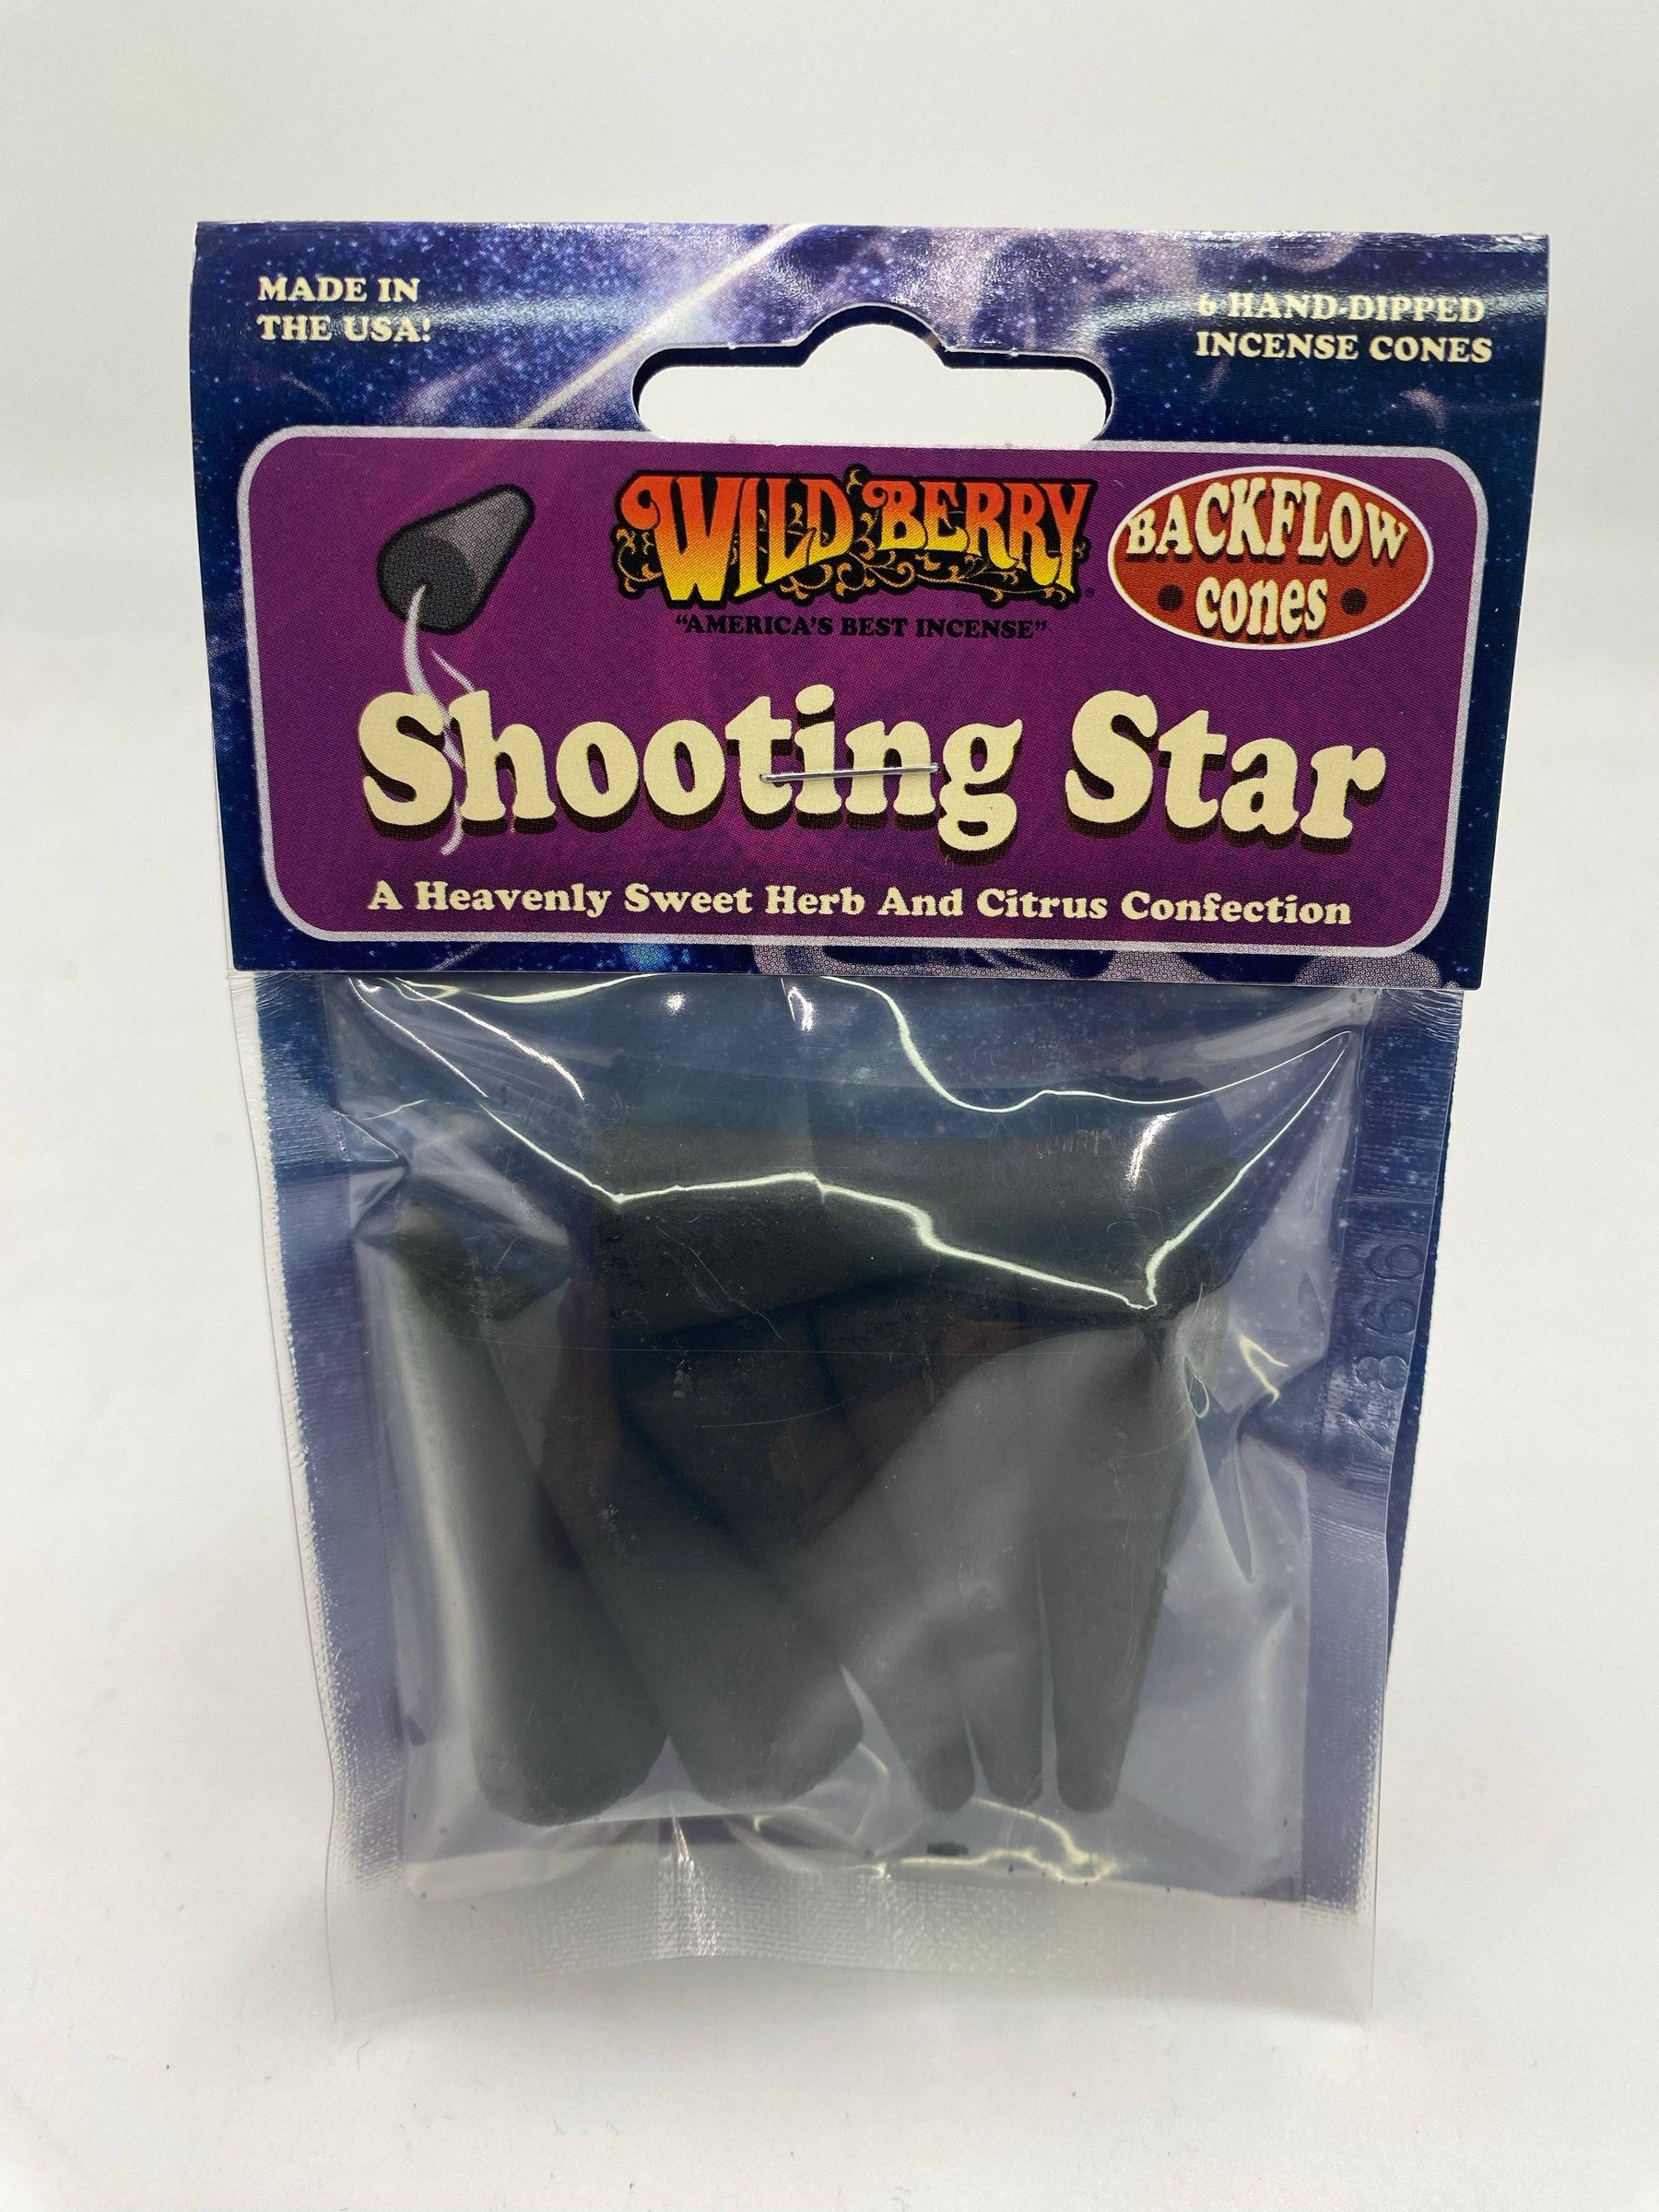 WILDBERRY BACK FLOW CONES SHOOTING STAR 6 CT BAG